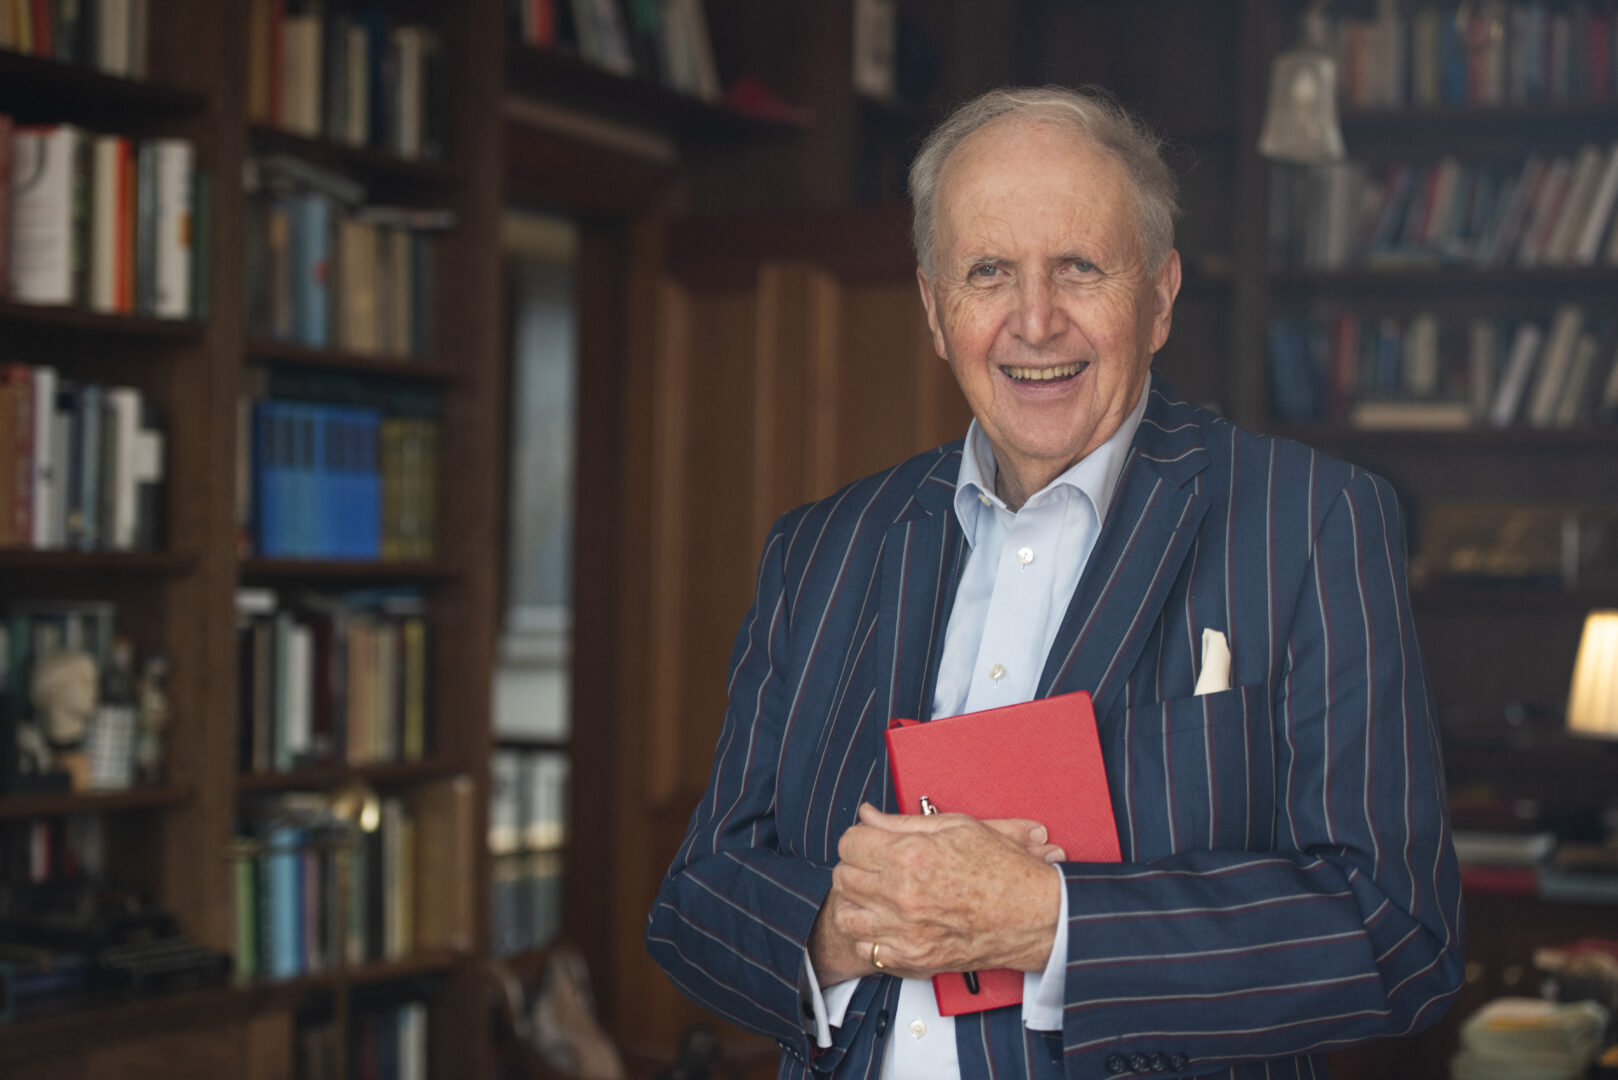  Crossing the Tees Book Festival presents Alexander McCall Smith